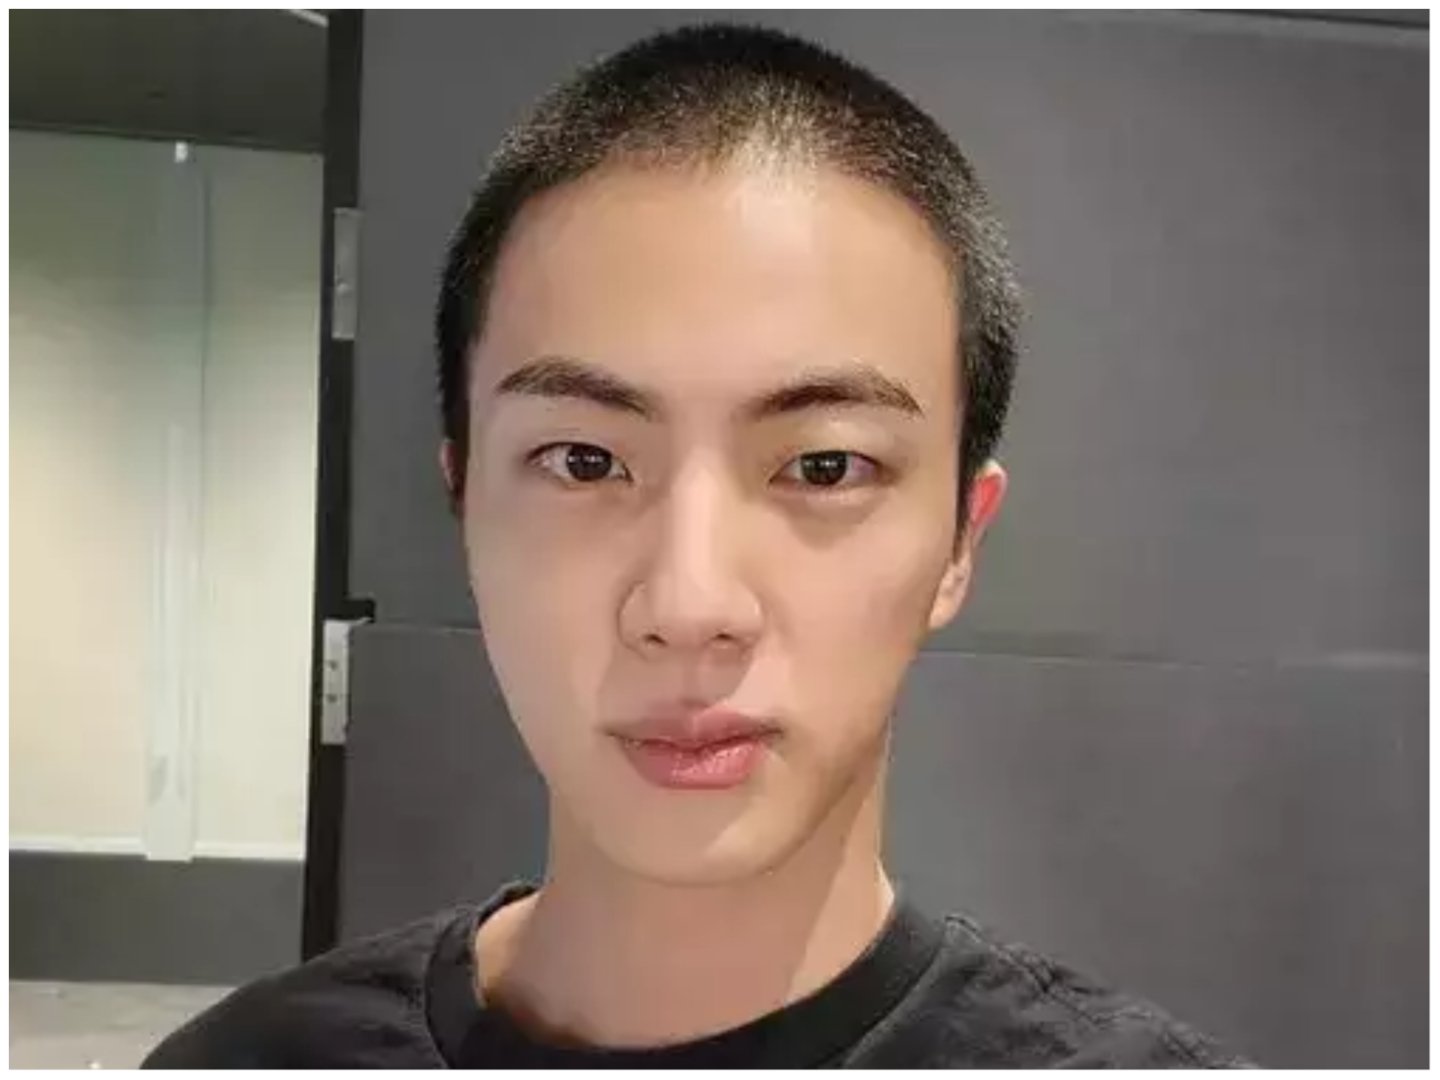 BTS' Jin in a shaved head